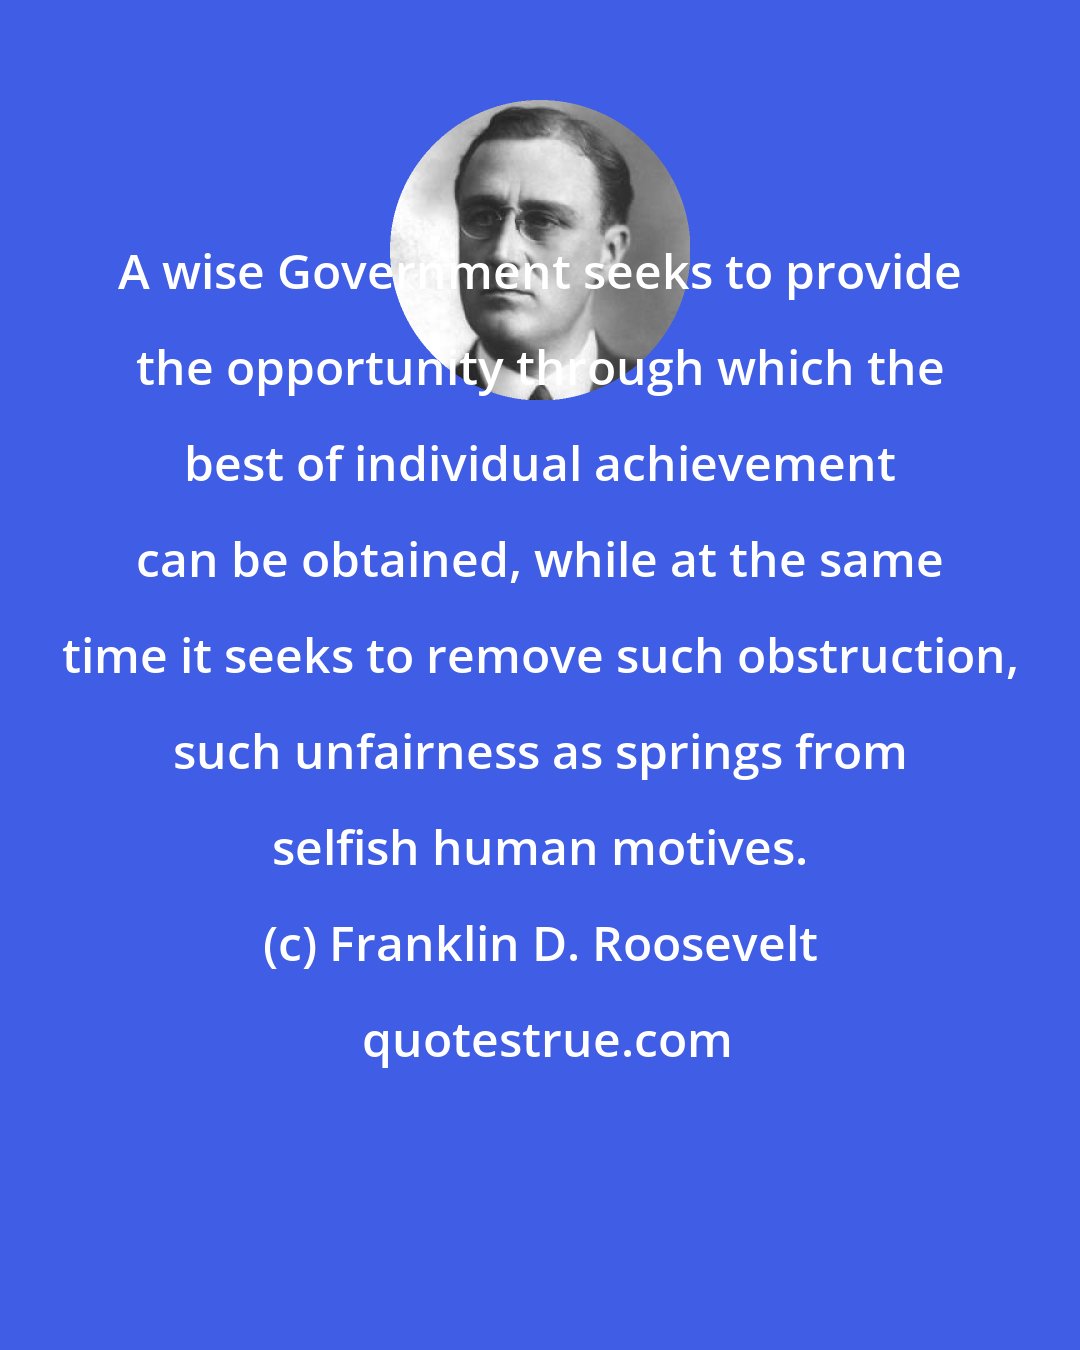 Franklin D. Roosevelt: A wise Government seeks to provide the opportunity through which the best of individual achievement can be obtained, while at the same time it seeks to remove such obstruction, such unfairness as springs from selfish human motives.